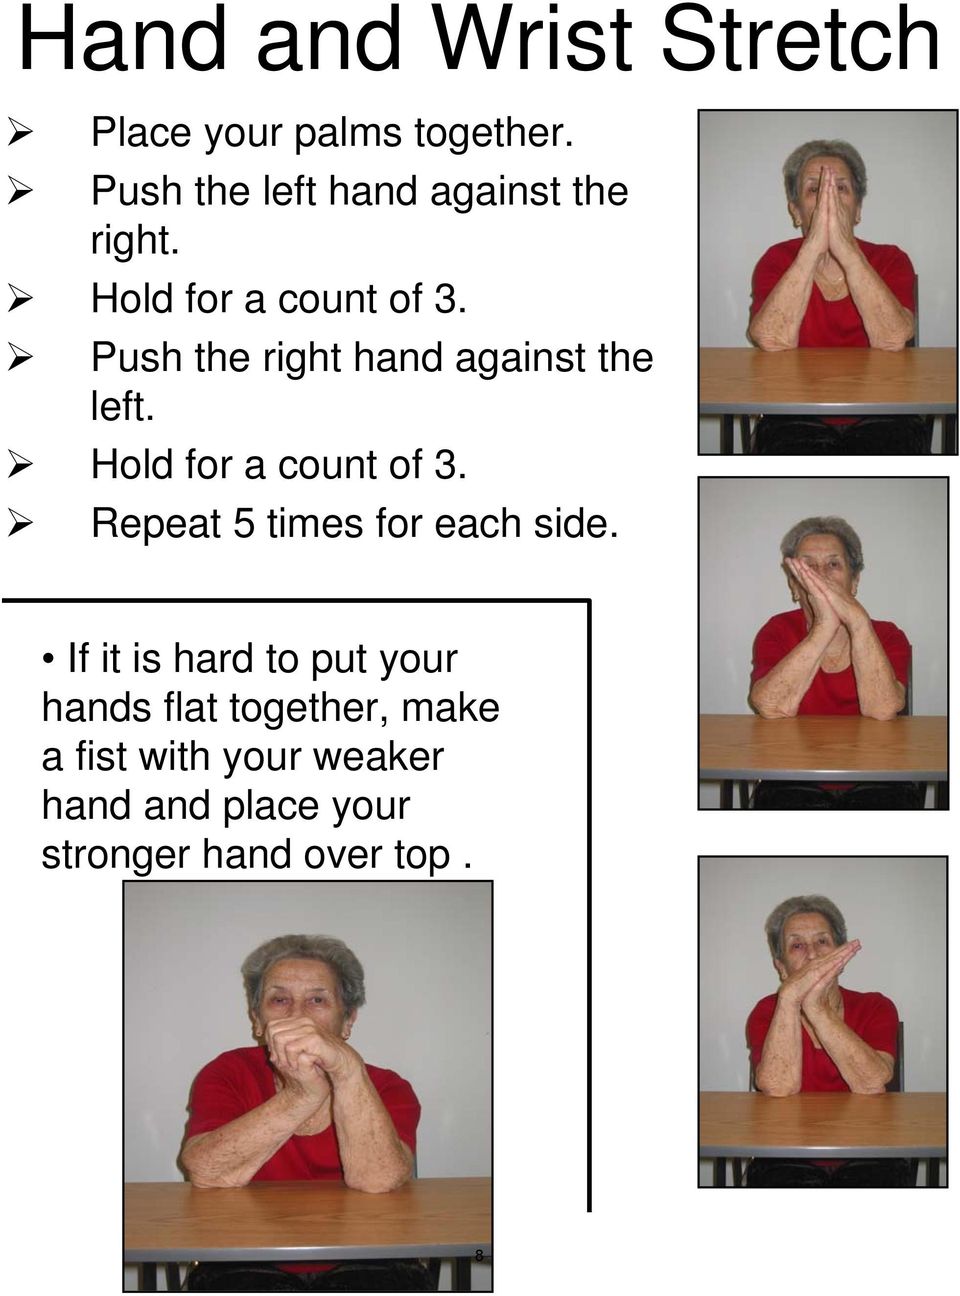 Push the right hand against the left. Hold for a count of 3.